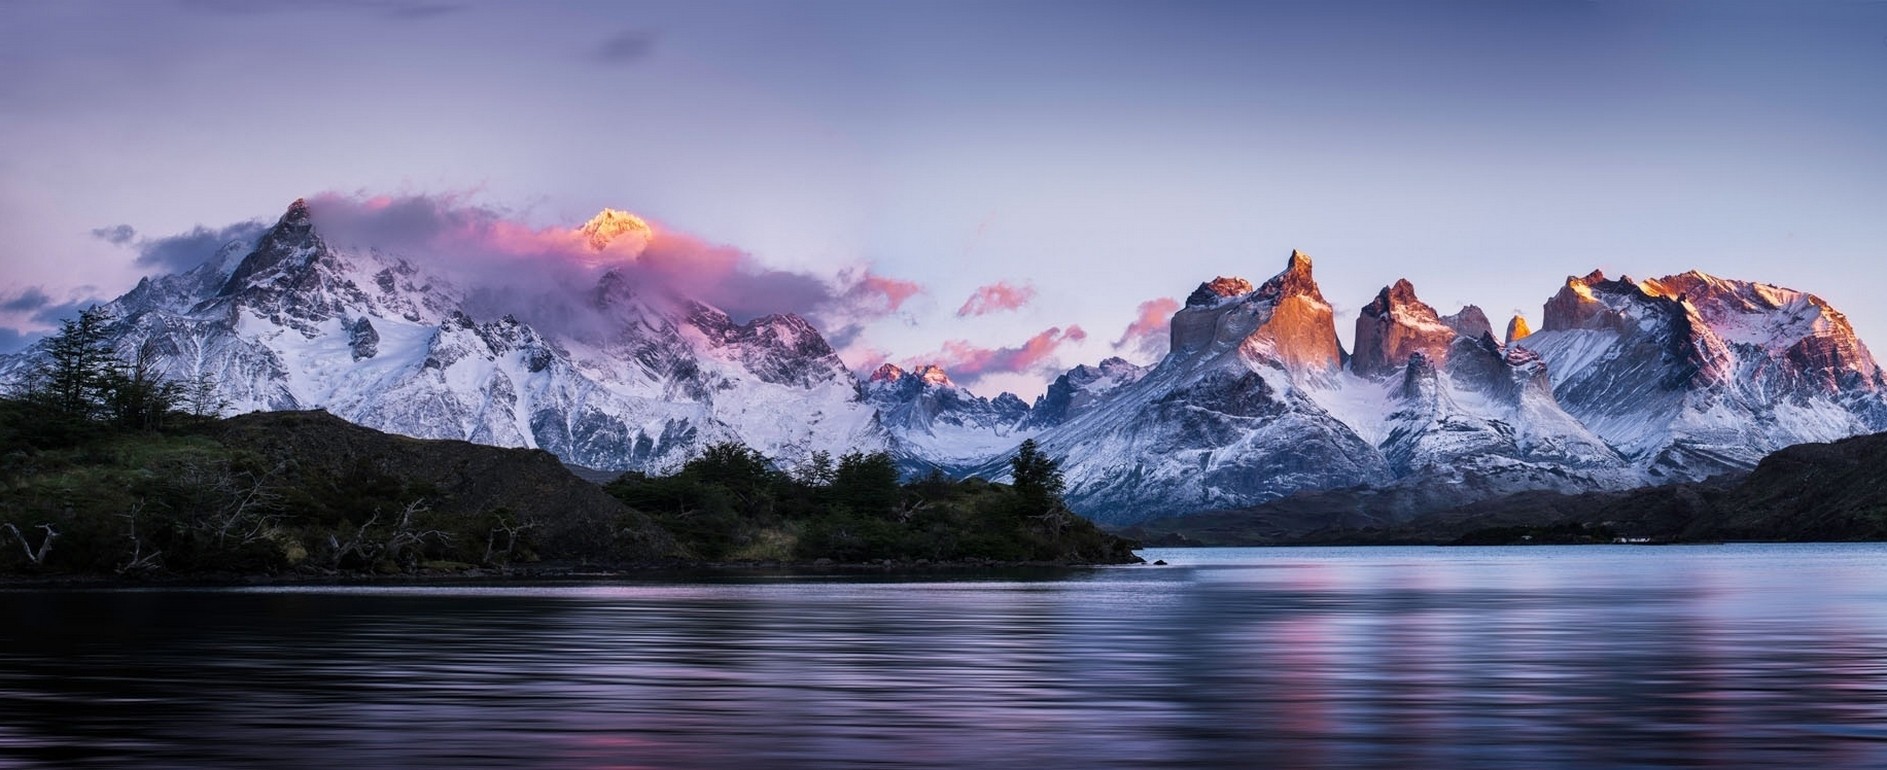 Panoramas Torres Del Paine Patagonia Chile Mountains Lake Snowy Peak Trees Nature Landscape 1887x770